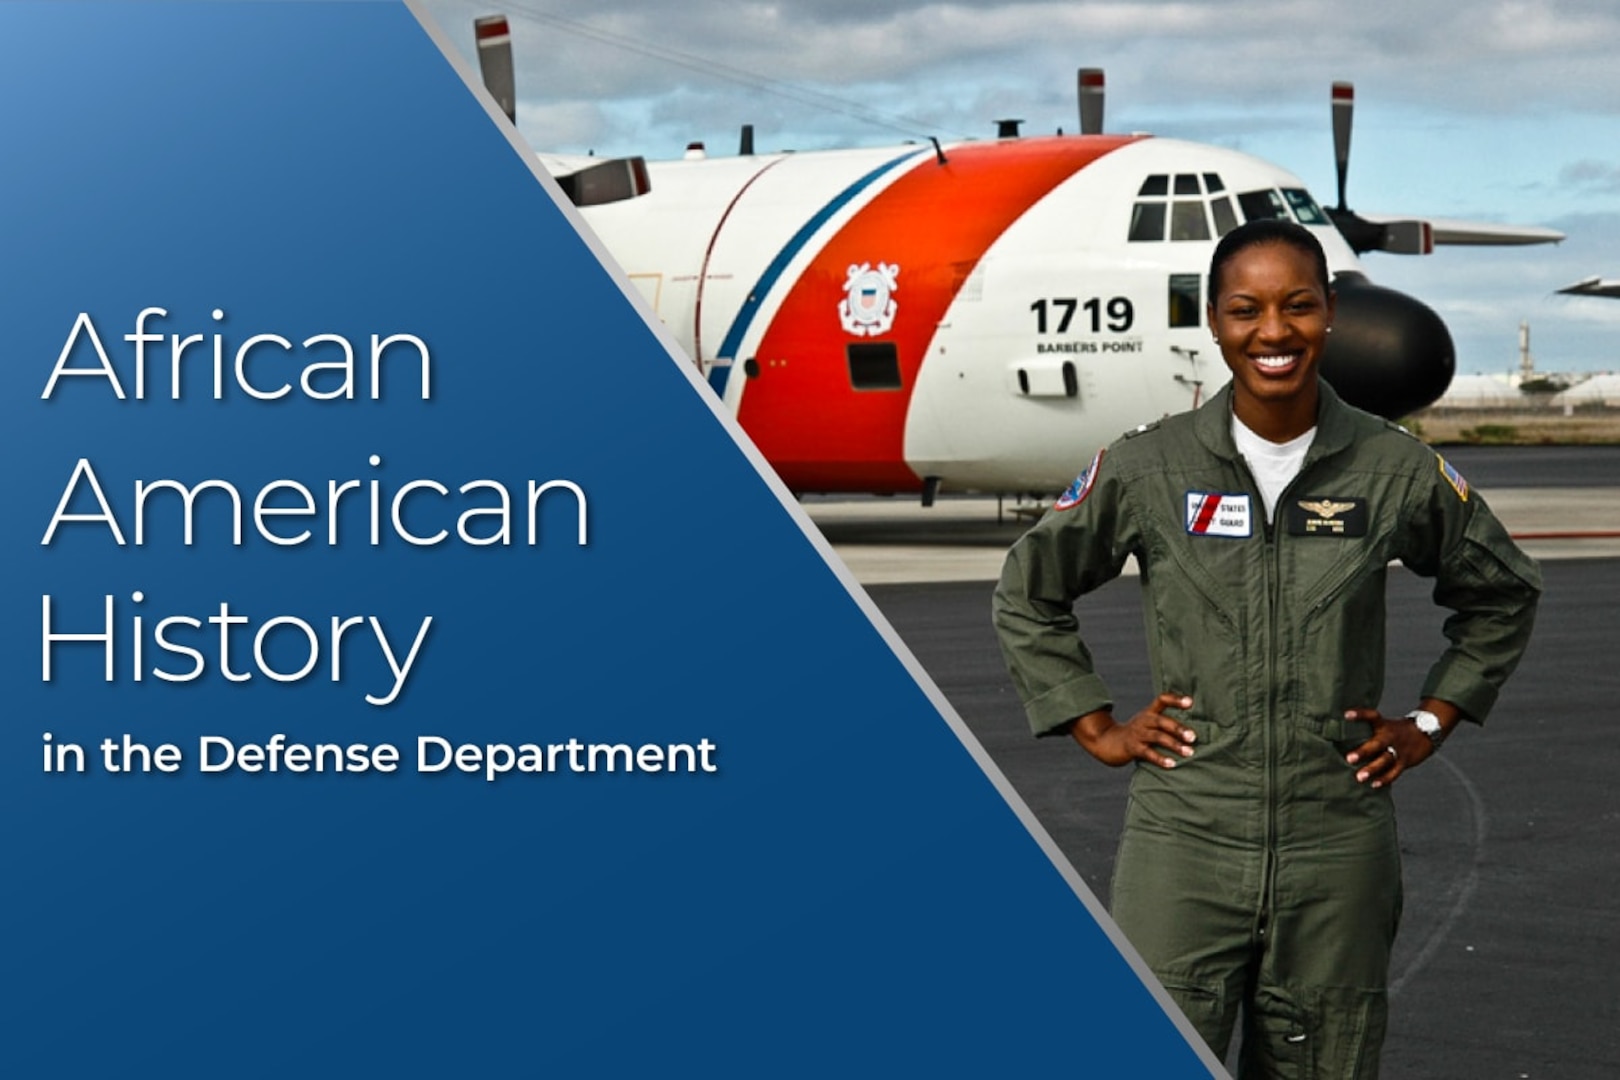 African American History in the Defense Department